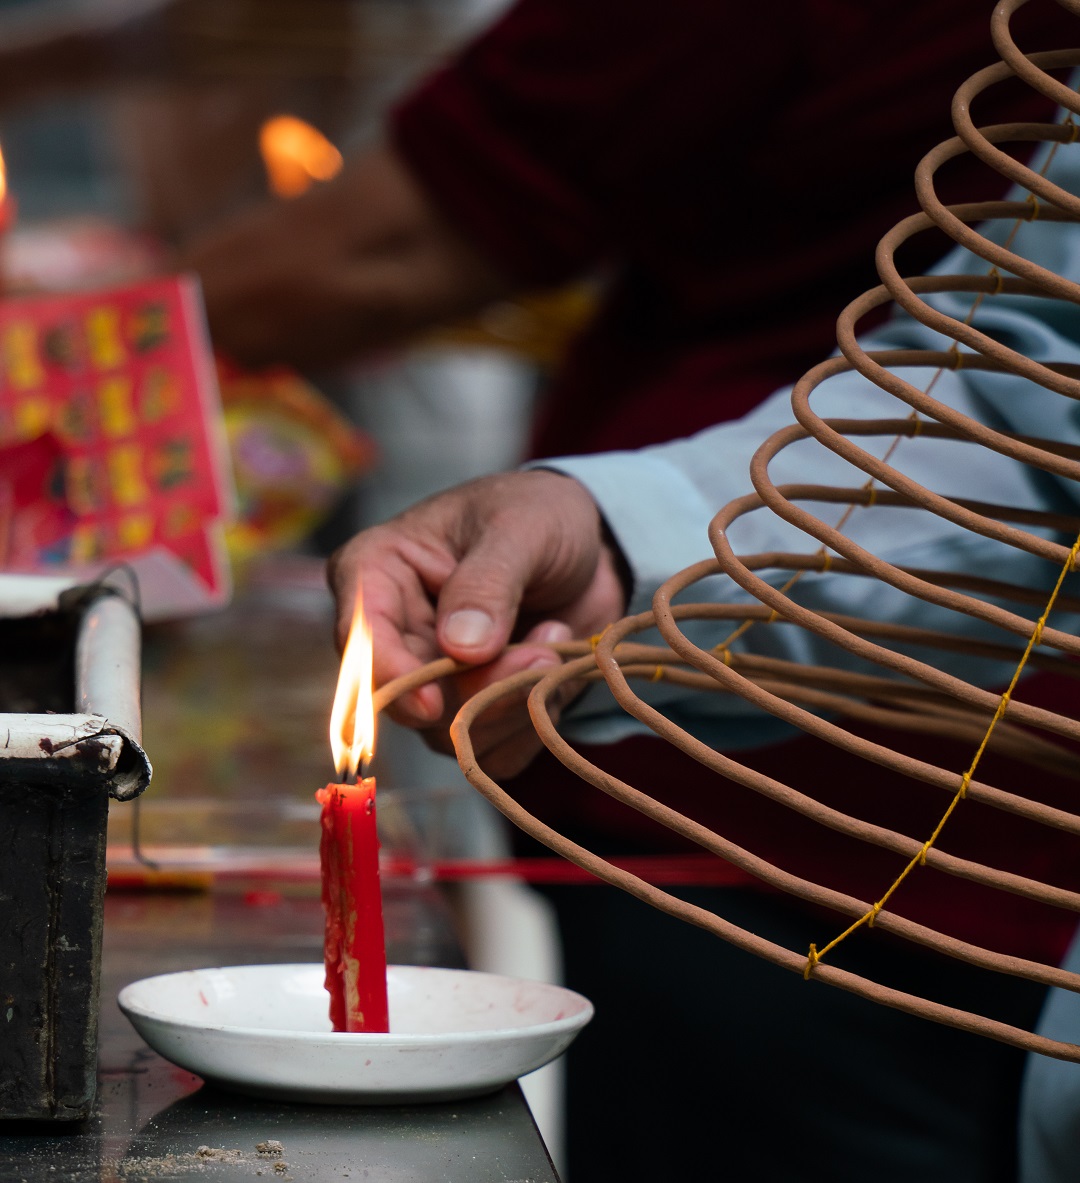 Conical incense coils are often used in the temple. Visitors tend to buy such incense coils and burn and hang them from the roof of the temple to pray for peace and good luck. Photo: Nguyen Trung Au / Tuoi Tre News